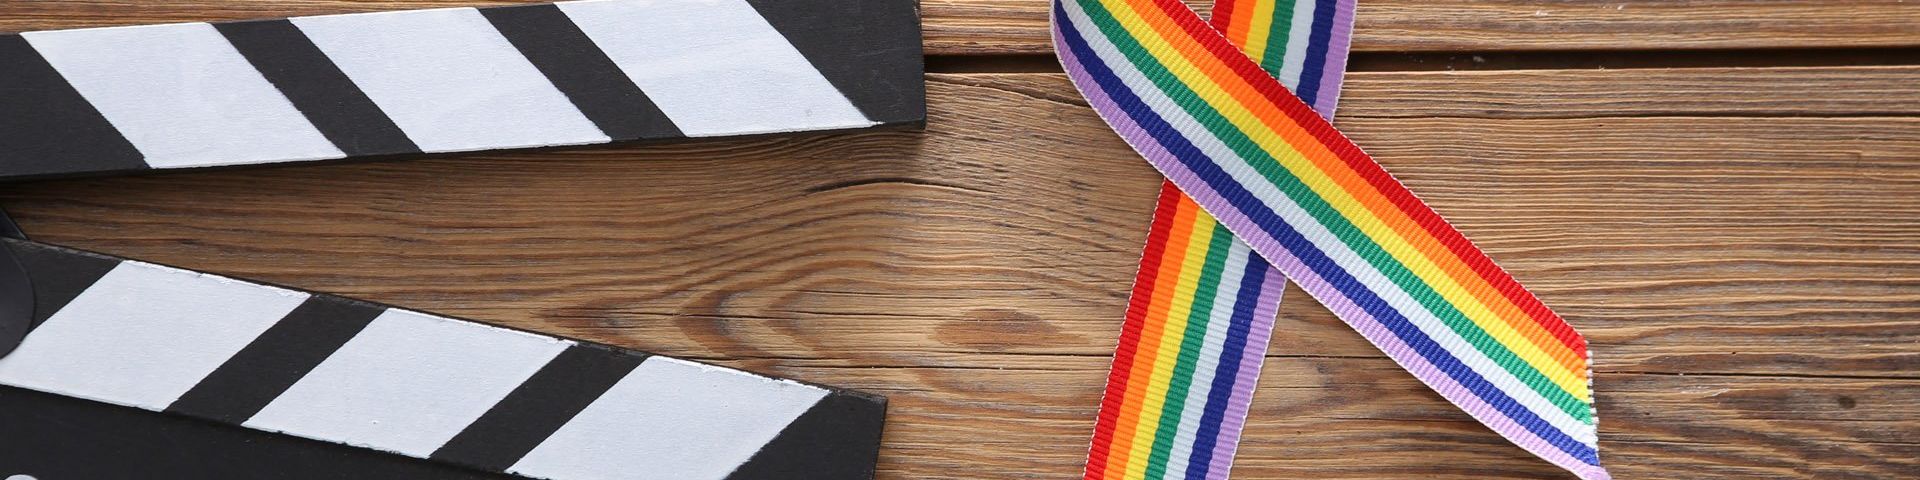 On the left is the black and white striped top of a clapperboard. Beside it is a Pride rainbow ribbon. They are both sat on a wooden table.